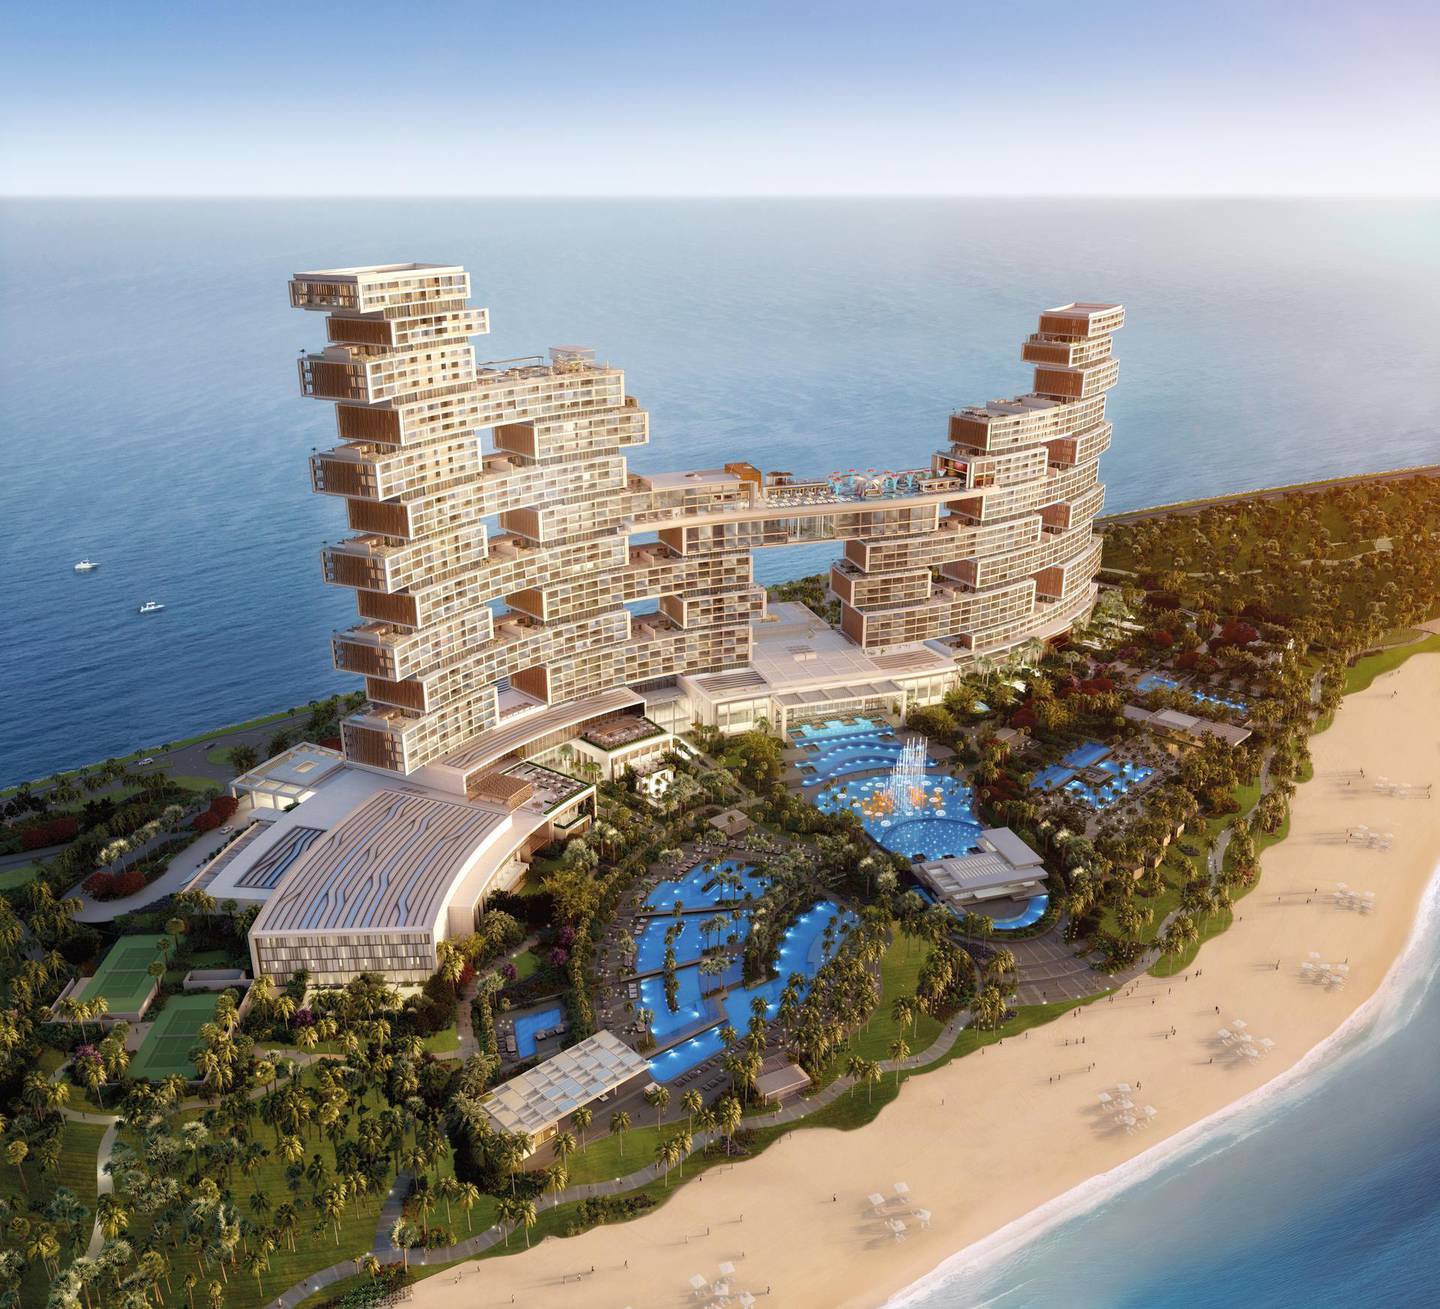 Atlantis, The Royal, is set to open in 2021 after its original opening date was pushed back. Courtesy Kerzner / Atlantis